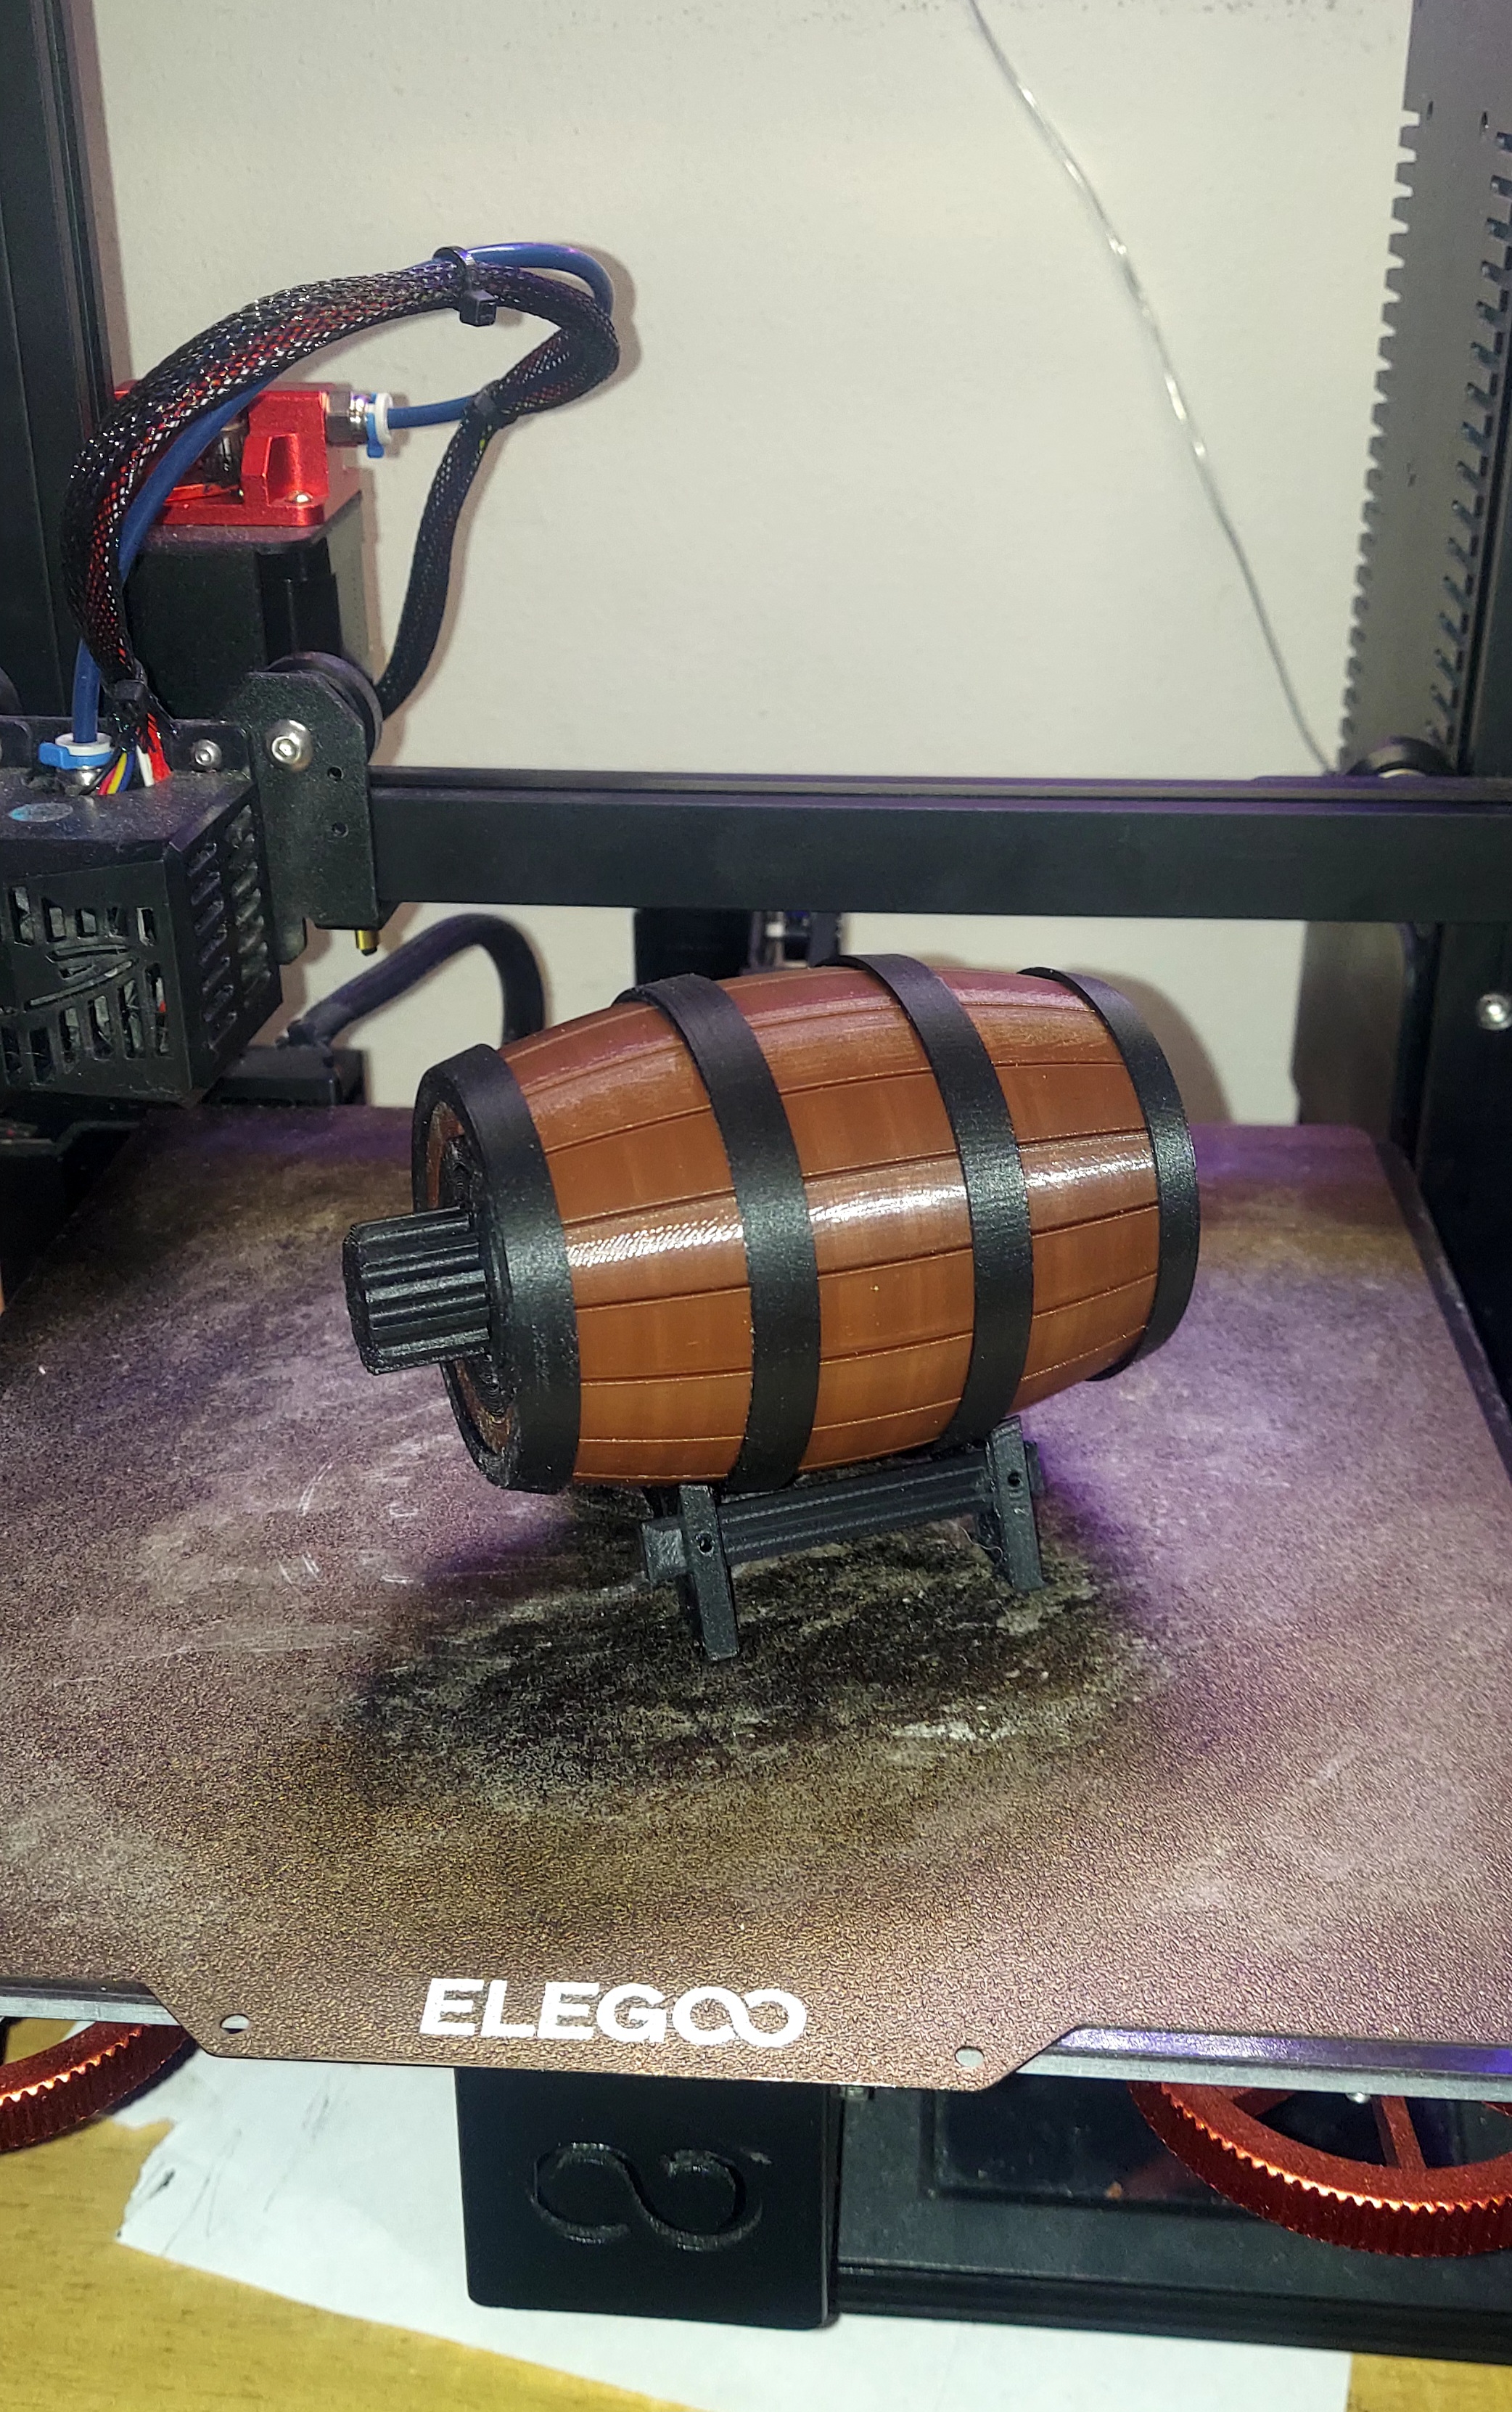 Print-in-Place Twisty Puzzle Box - Barrel - I printed it at 75% so the lock took a bit more effort to free up. It works great and kids like it results. - 3d model